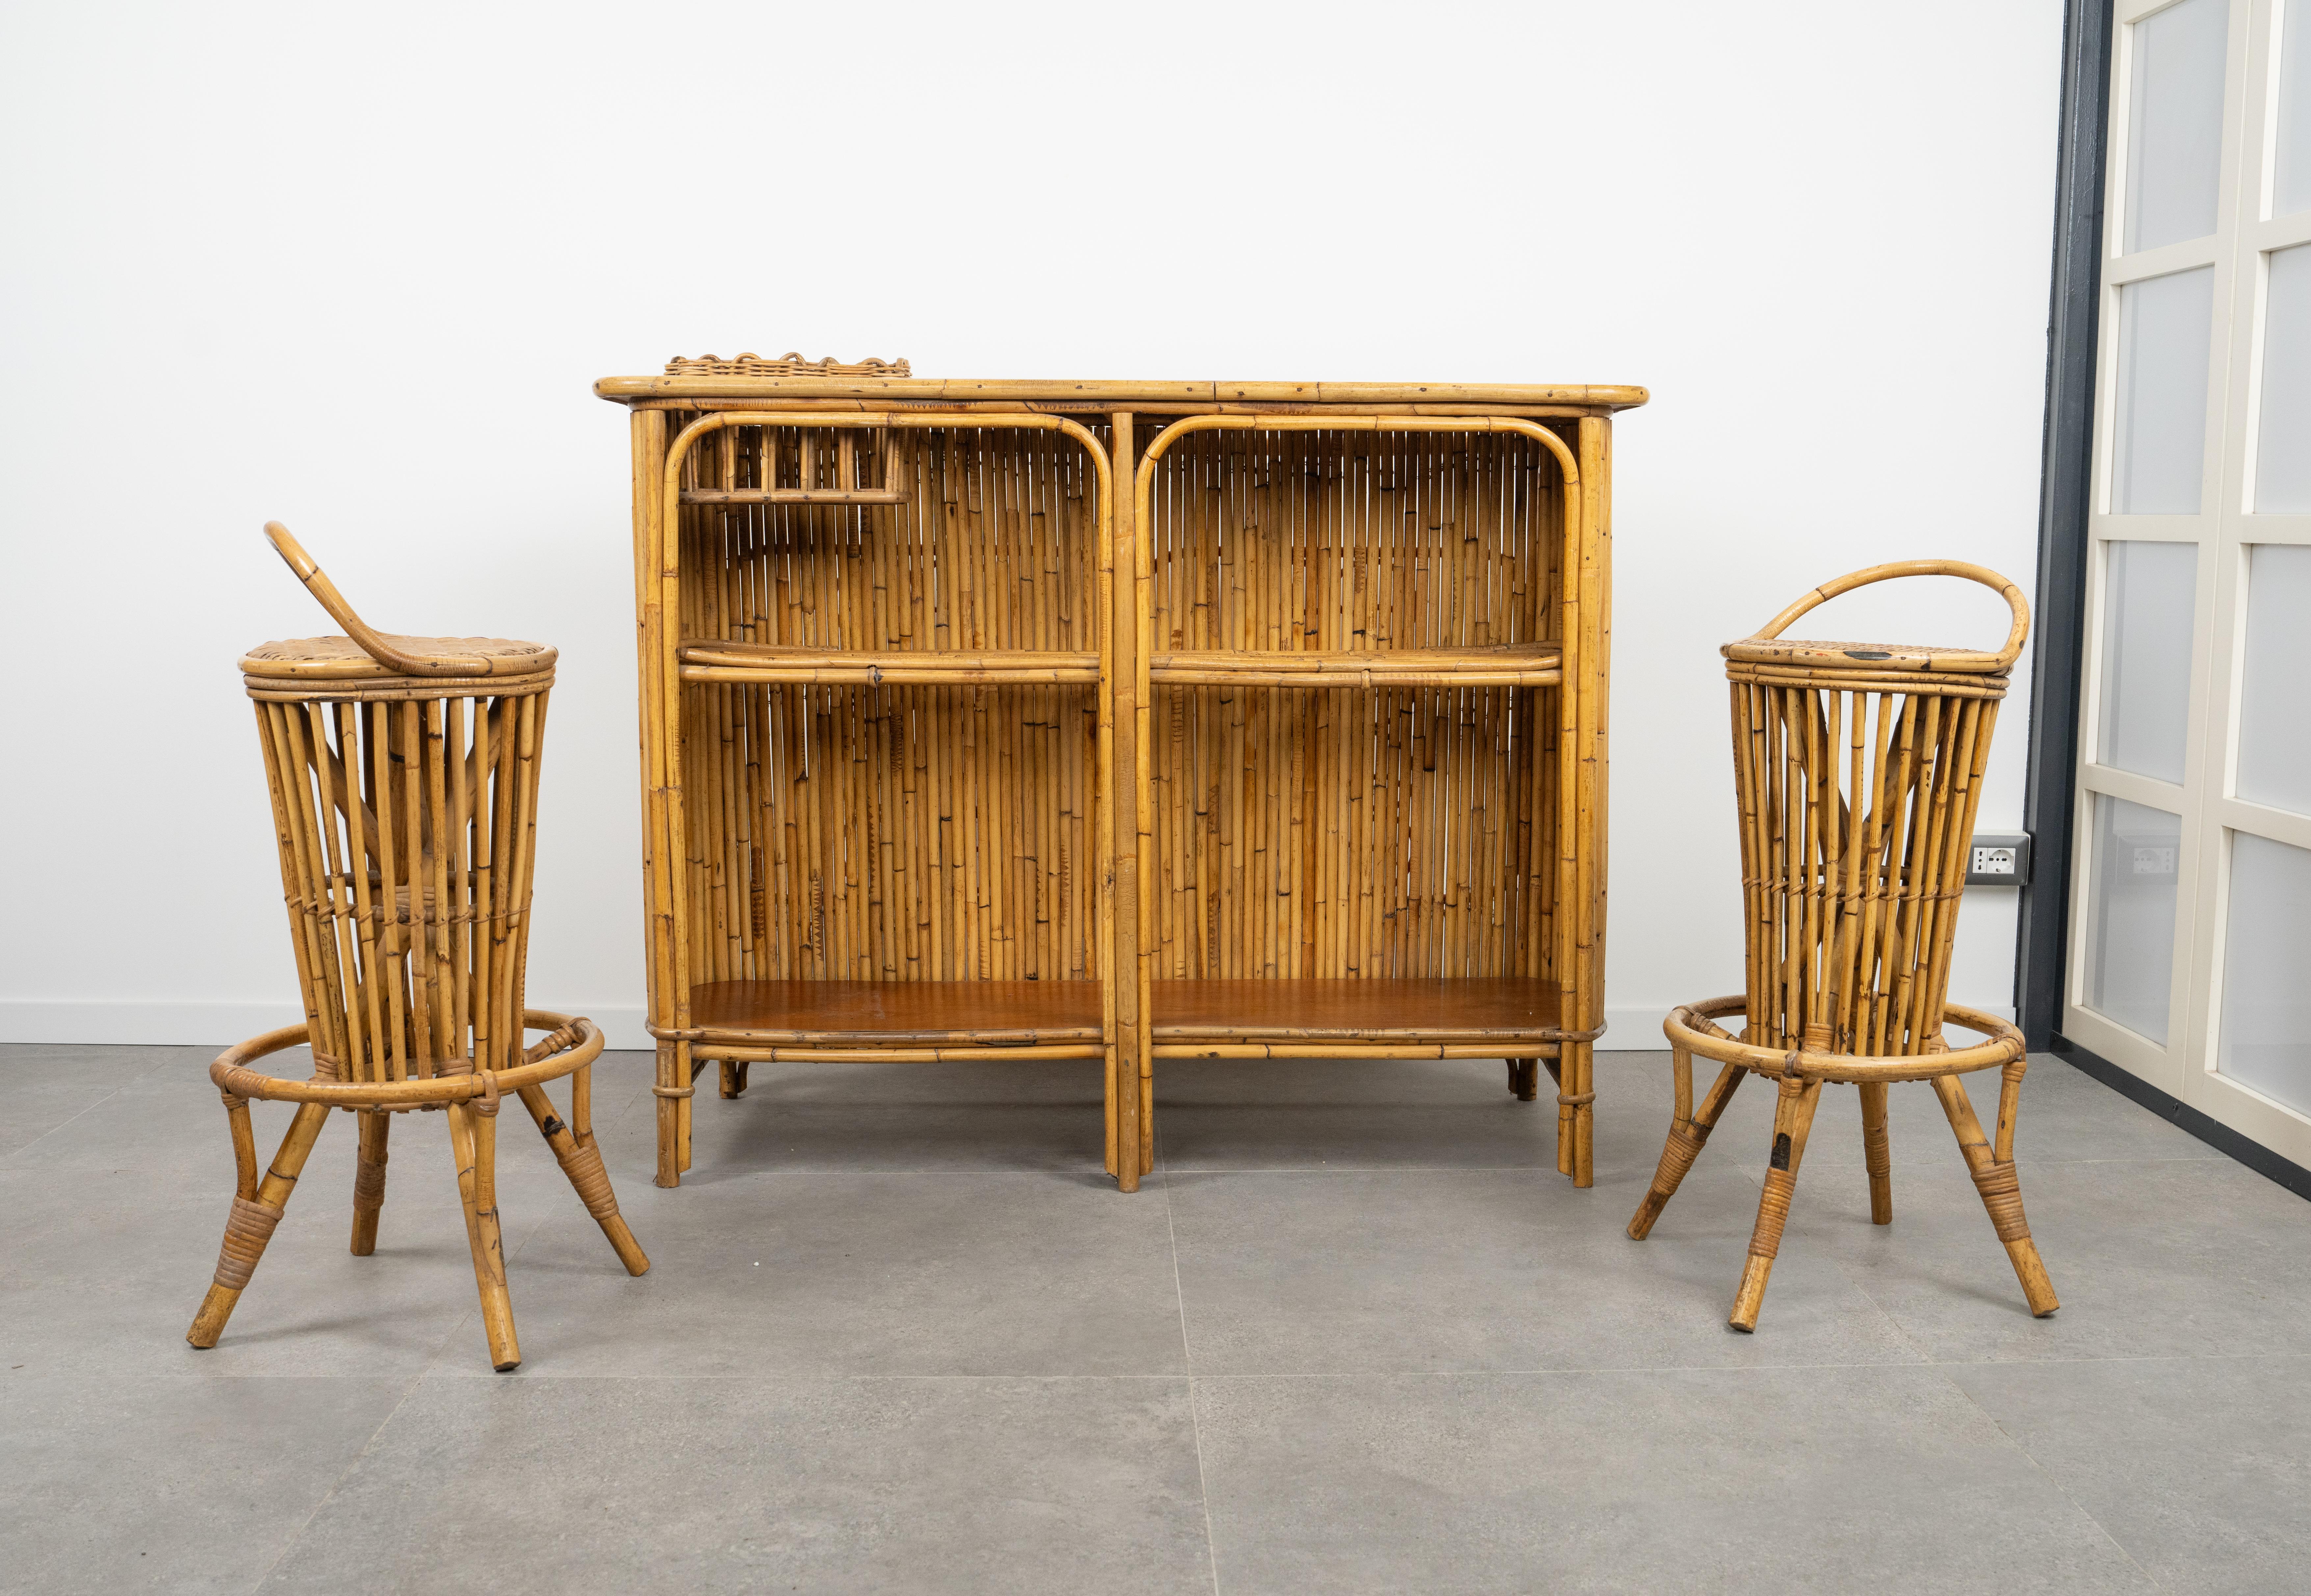 Mid-20th Century Bamboo and Rattan Cabinet Bar with Two Stools by Tito Agnoli, Italy 1950s For Sale